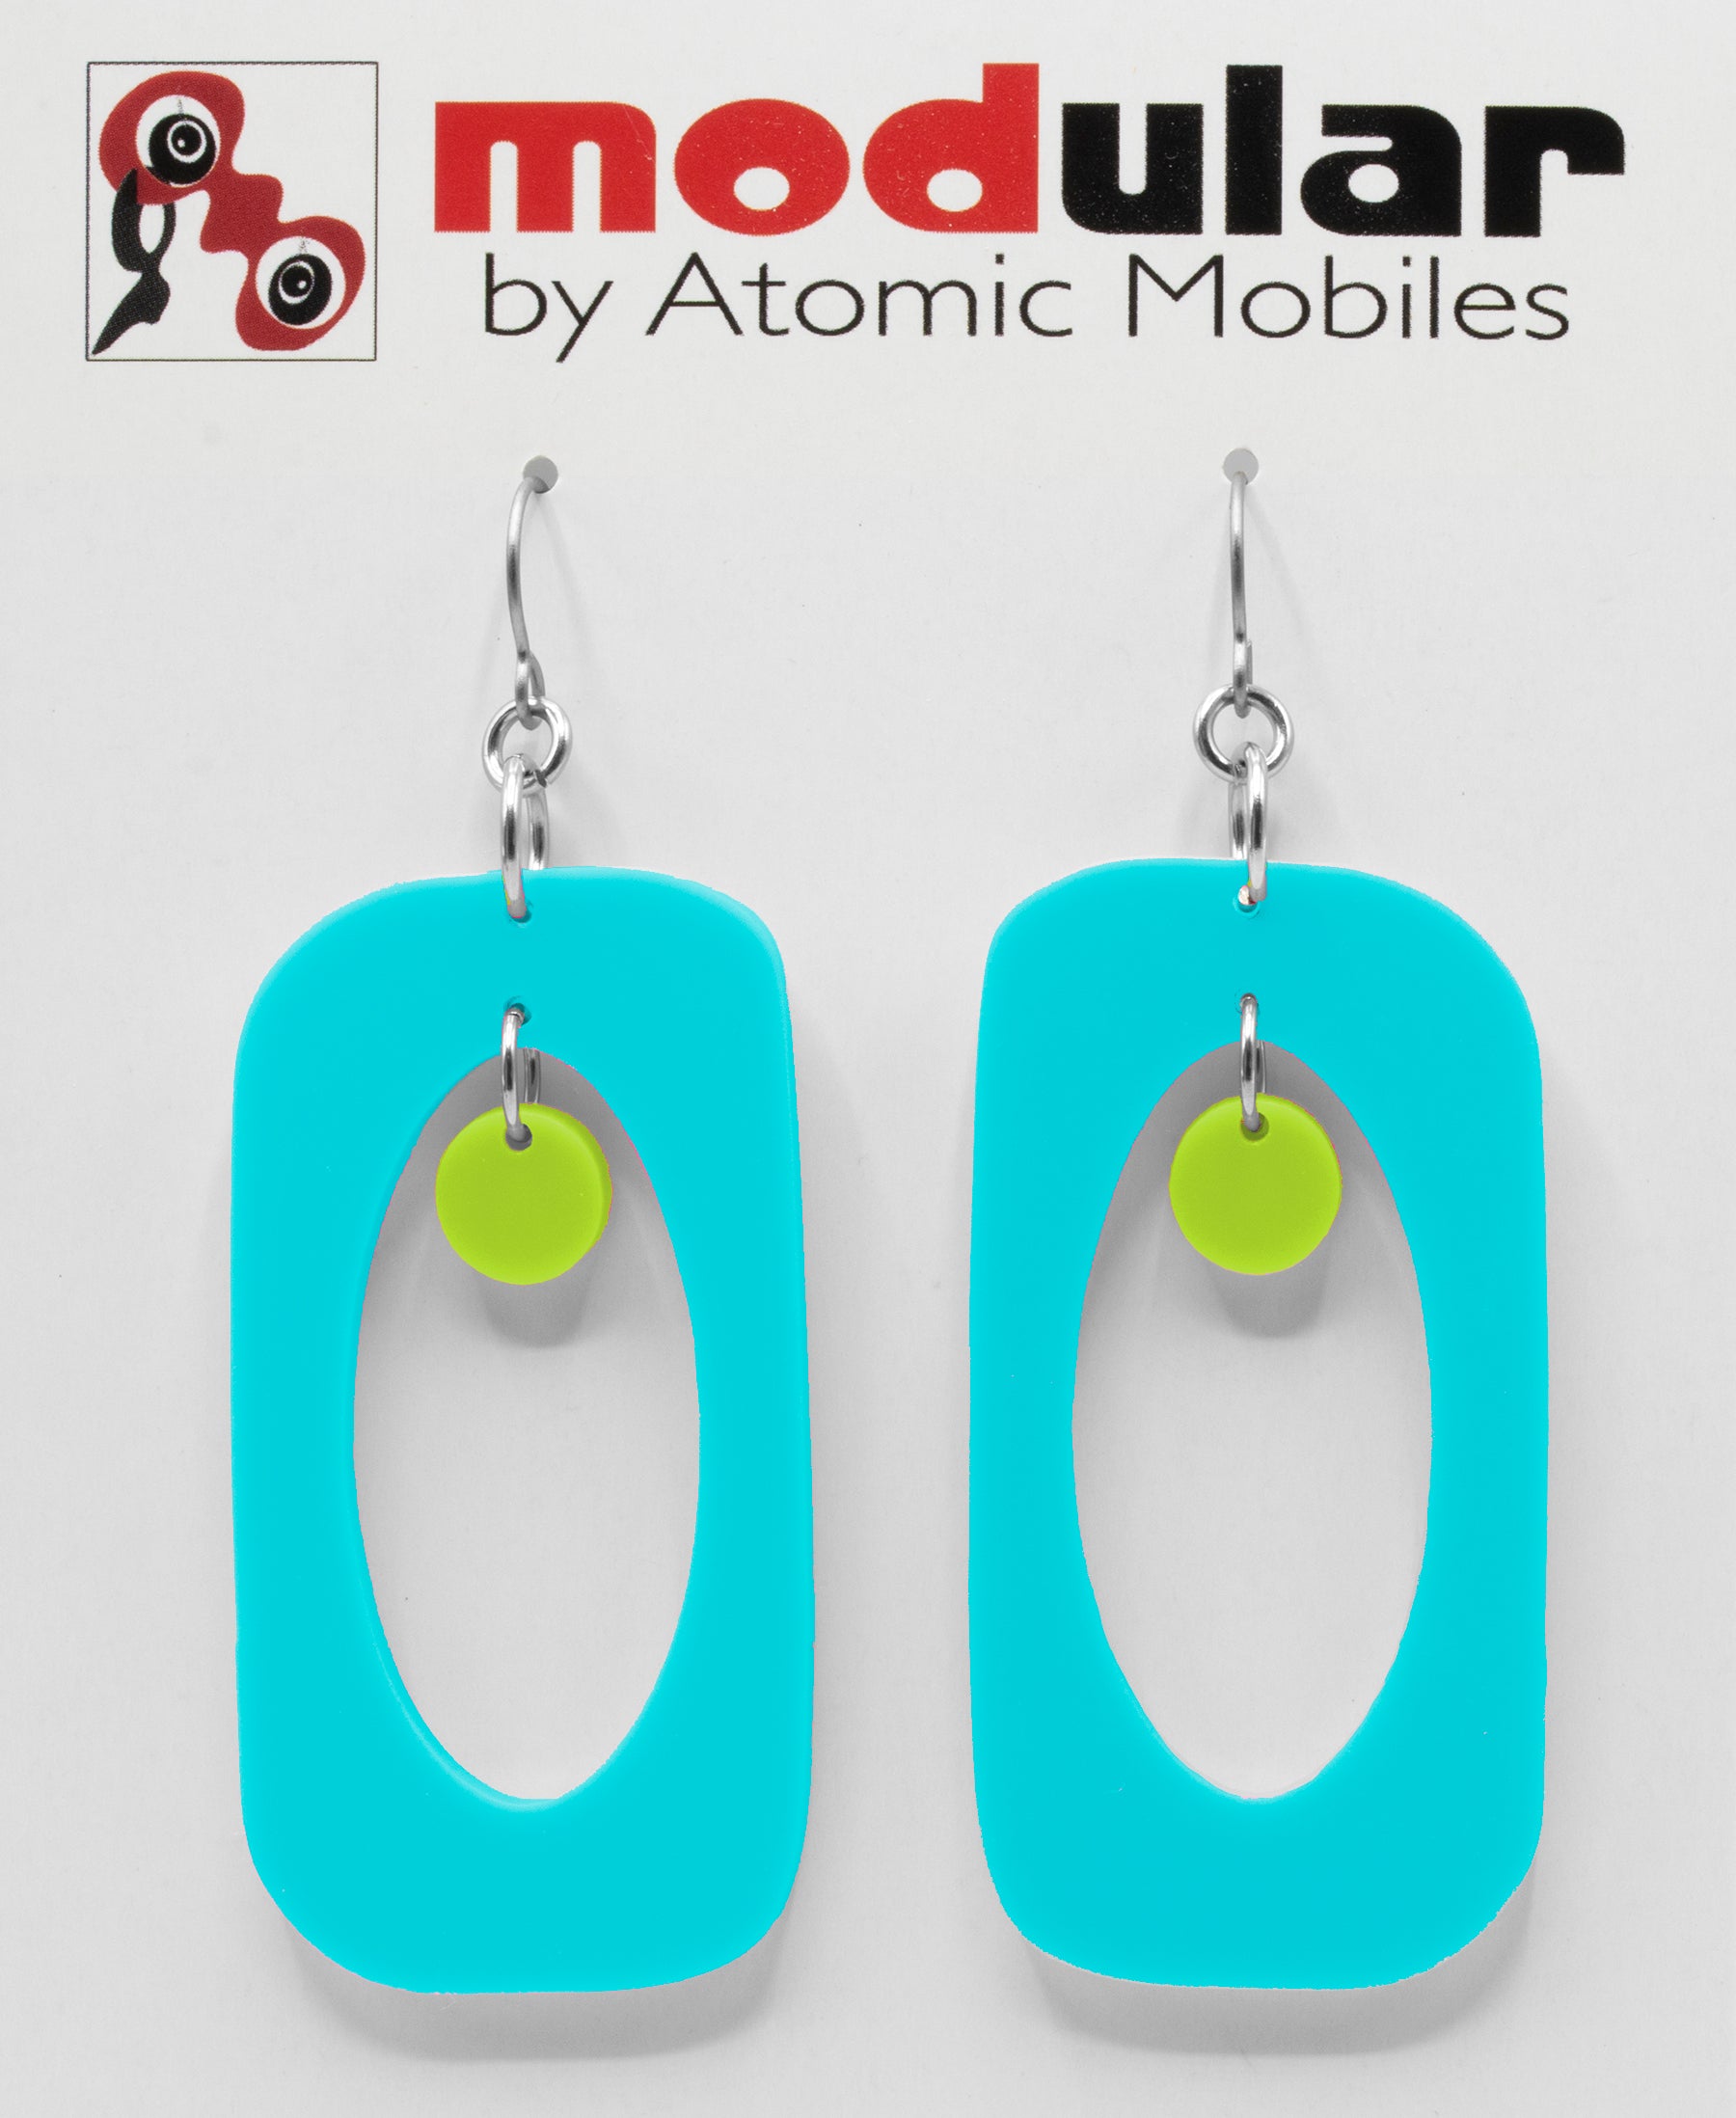 MODular Earrings - Beatnik Boho Statement Earrings in Aqua and Lime - Palm Springs Colors - by AtomicMobiles.com - retro era inspired mod handmade jewelry